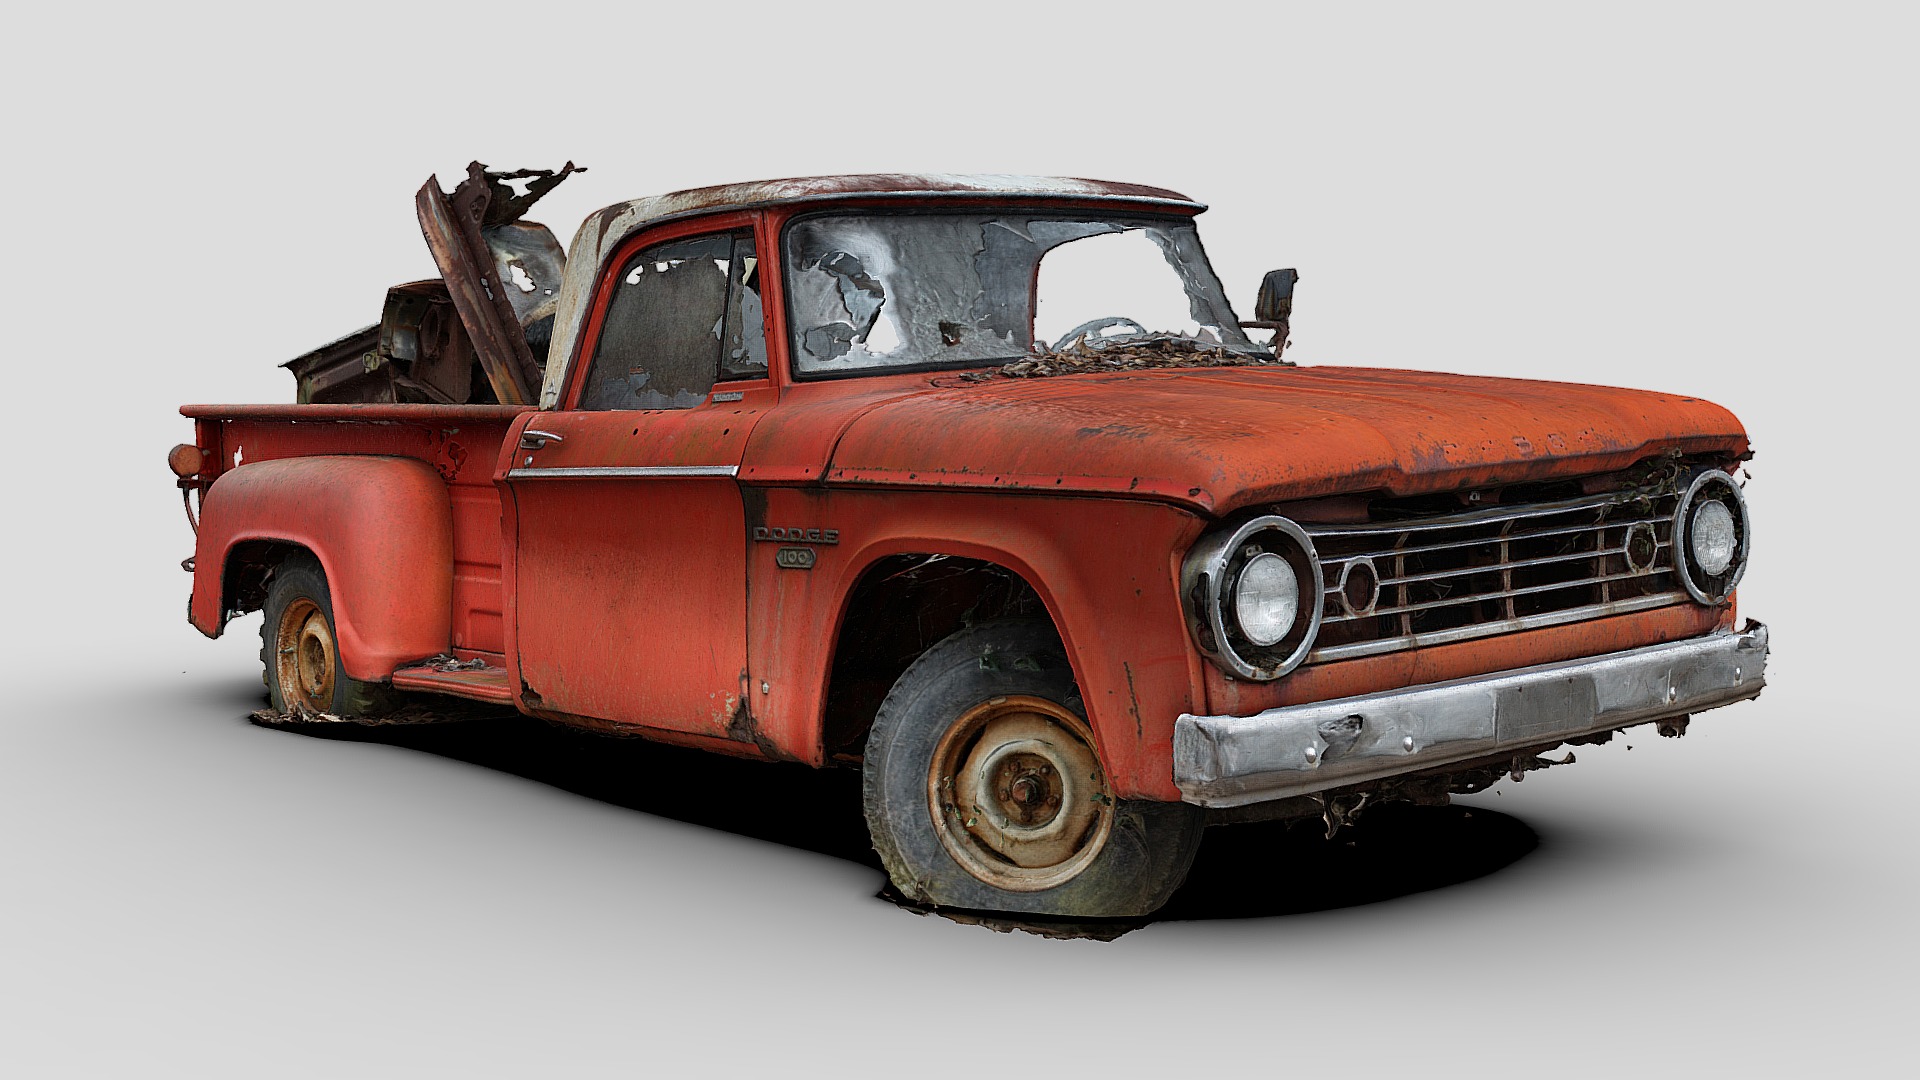 3D model Scrap Hauler (Raw Scan) - This is a 3D model of the Scrap Hauler (Raw Scan). The 3D model is about a red truck with a large engine.